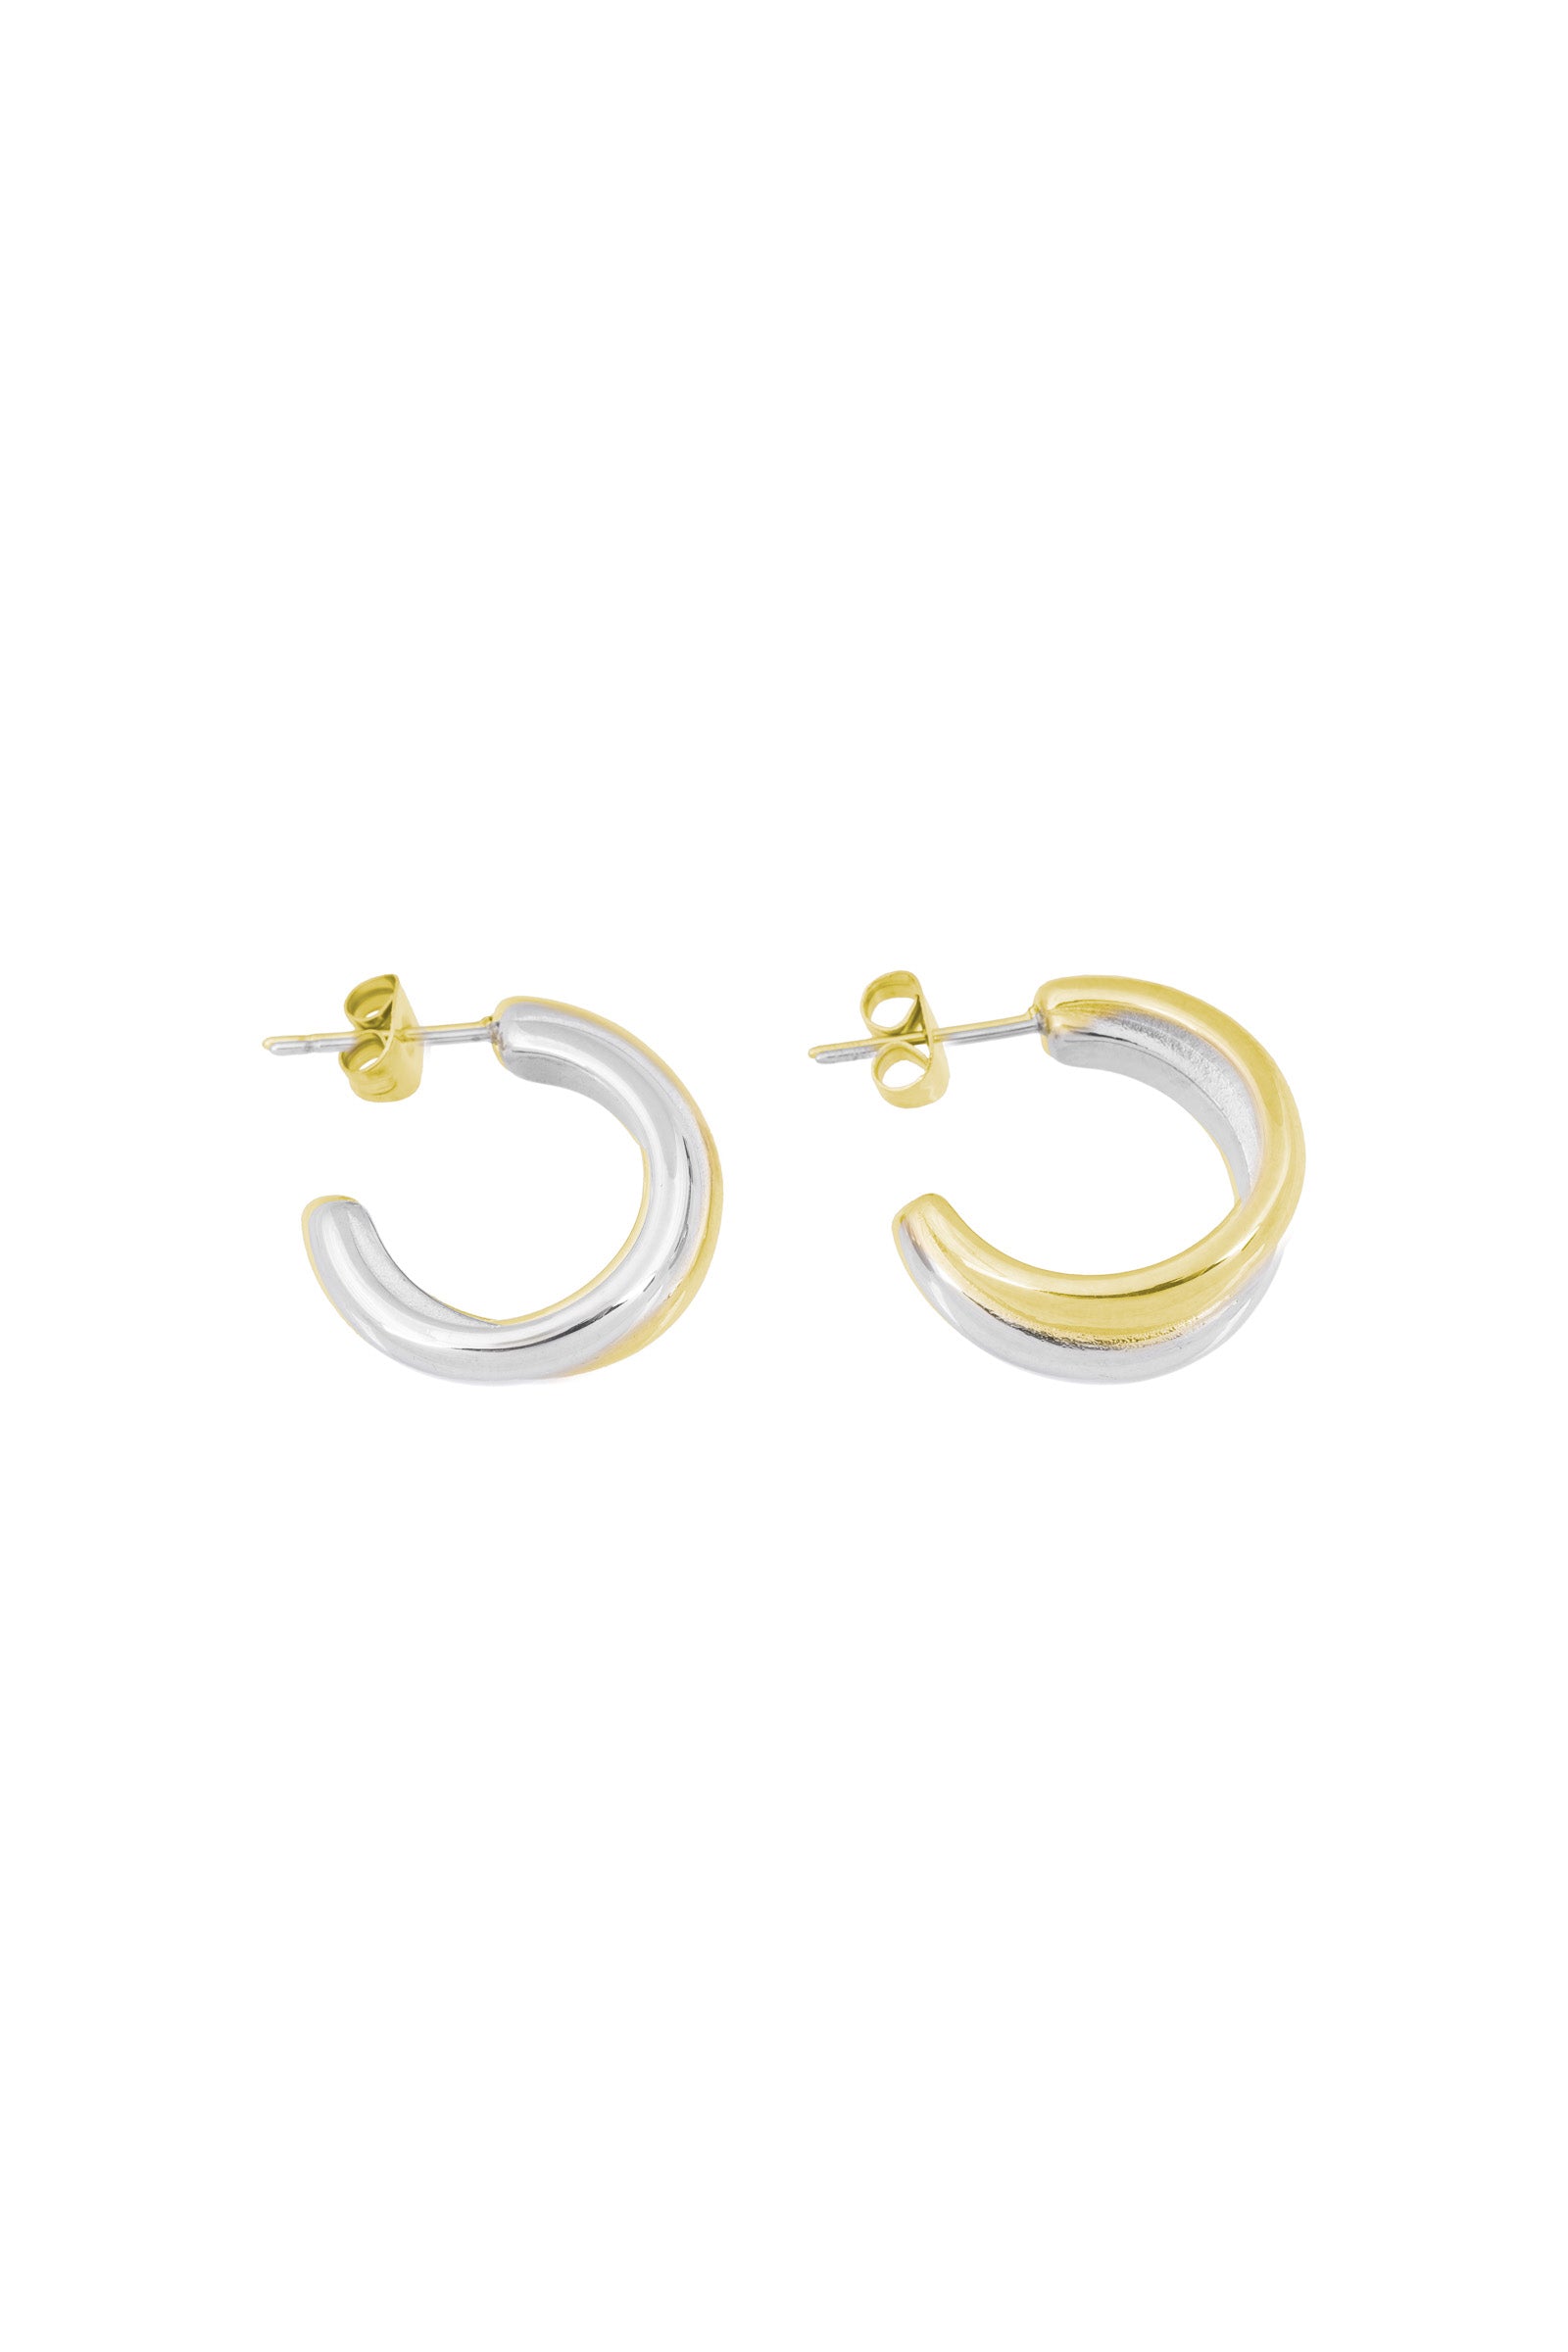 Bandhu Better Together Earrings - Gold / Silver - RUM Amsterdam